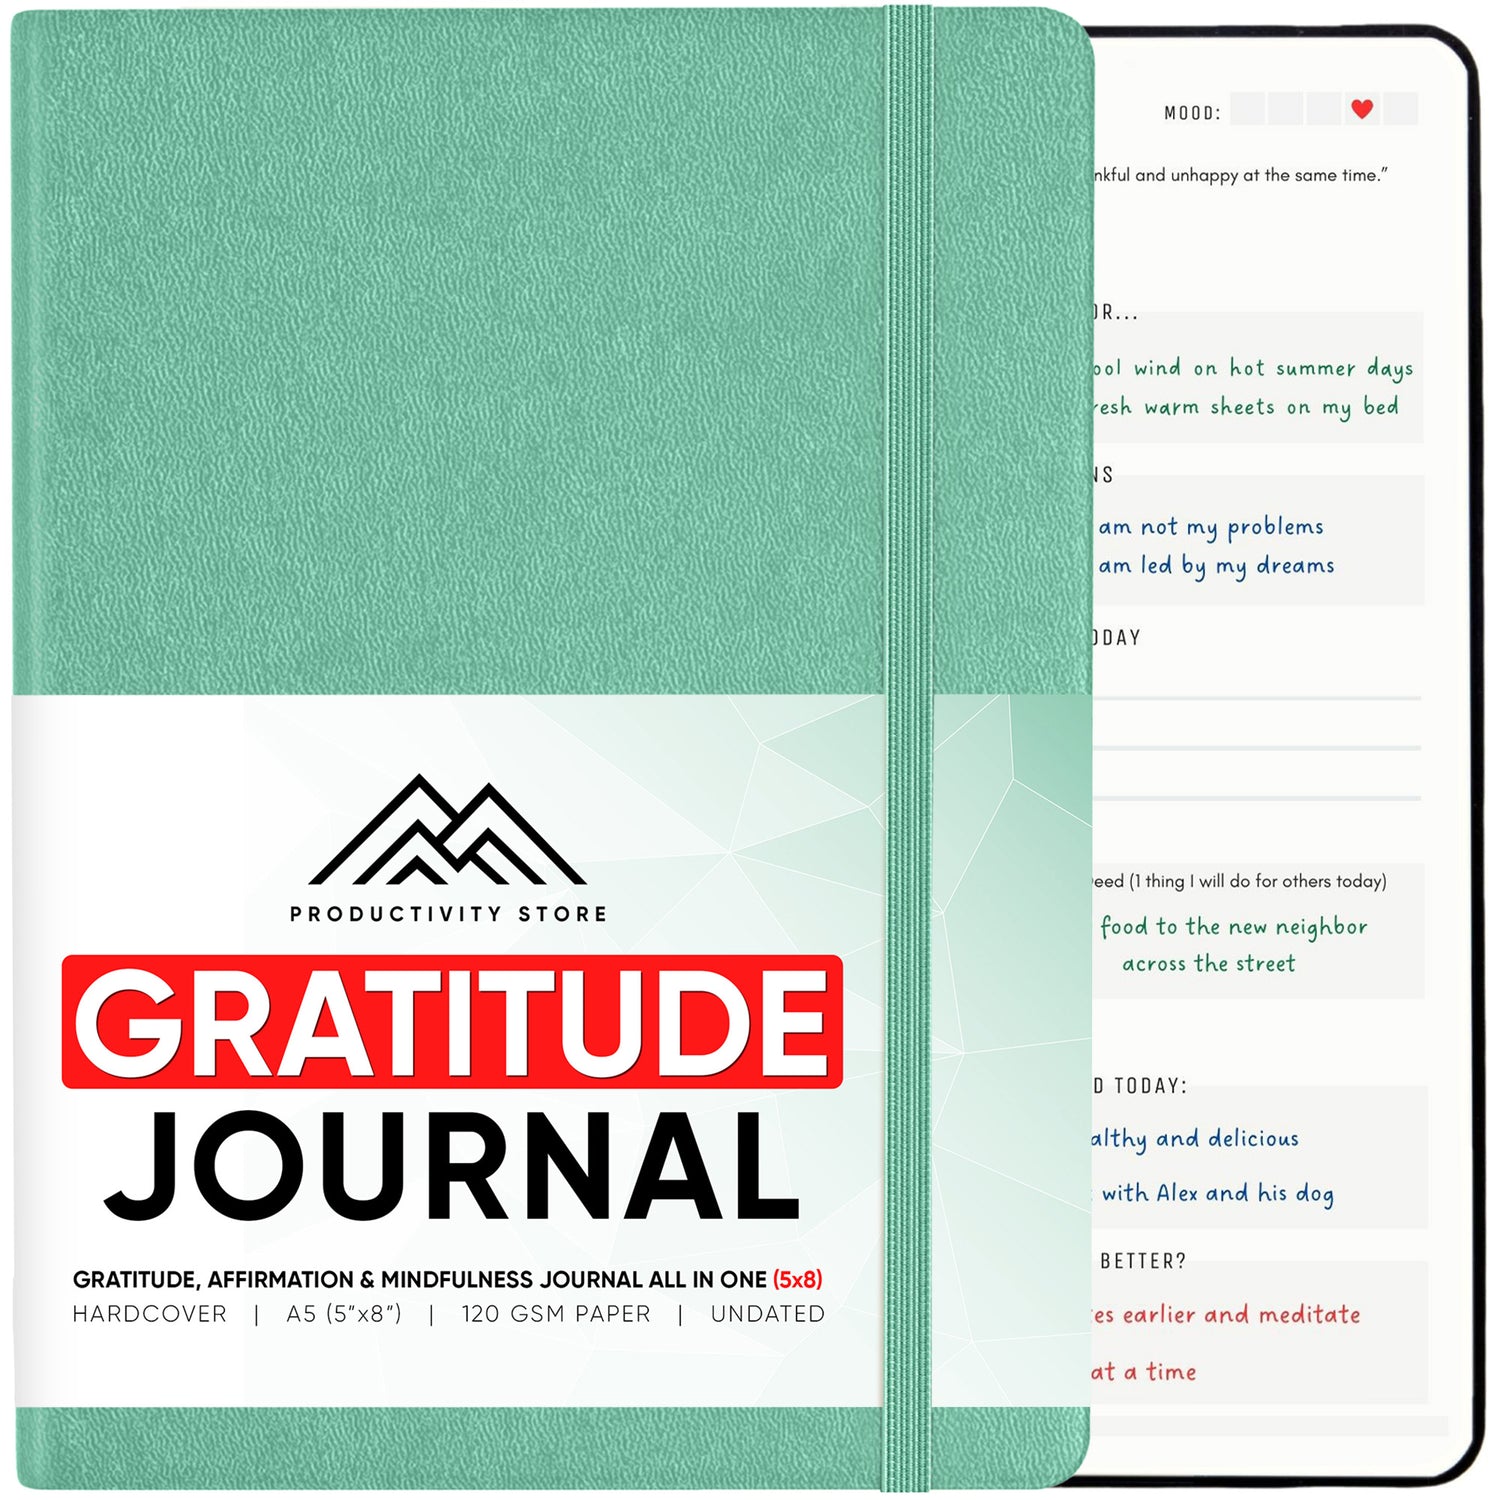 How a Gratitude Journal Can Change Your Life for the Better